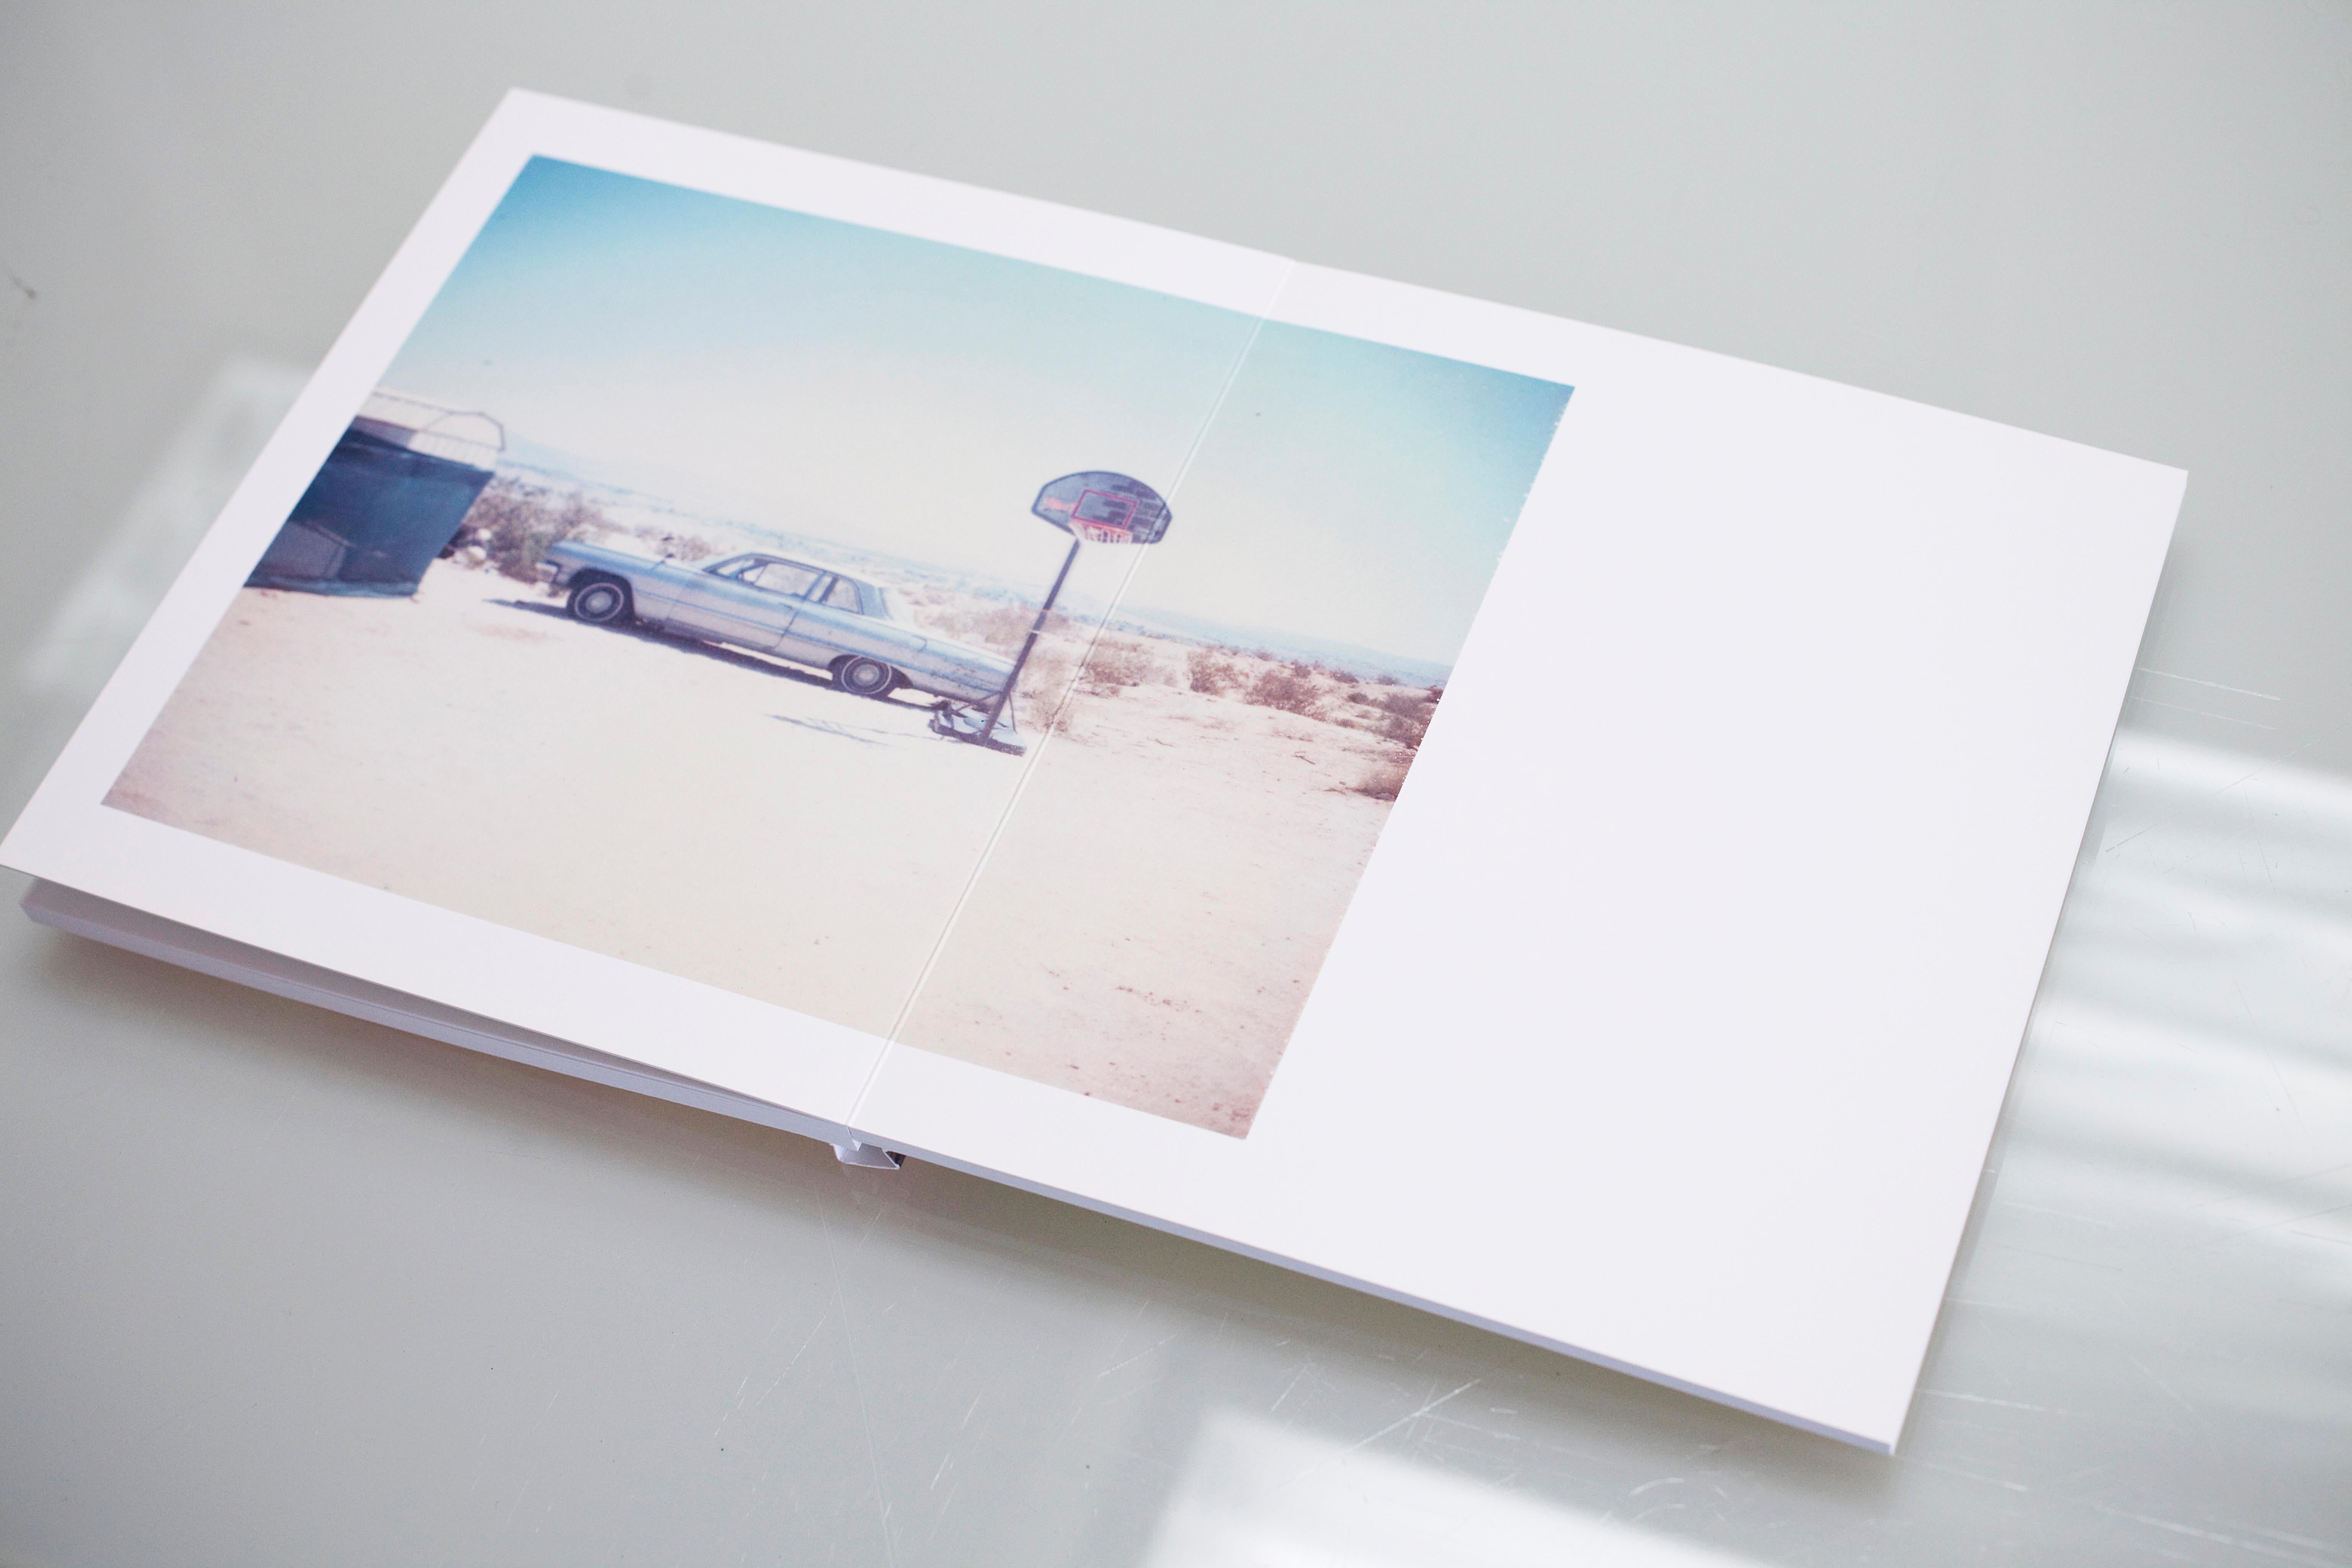 29 Palms, CA published by Galerie Kaempf, Basel, 2004  - Monograph and C-Print - Contemporary Photograph by Stefanie Schneider